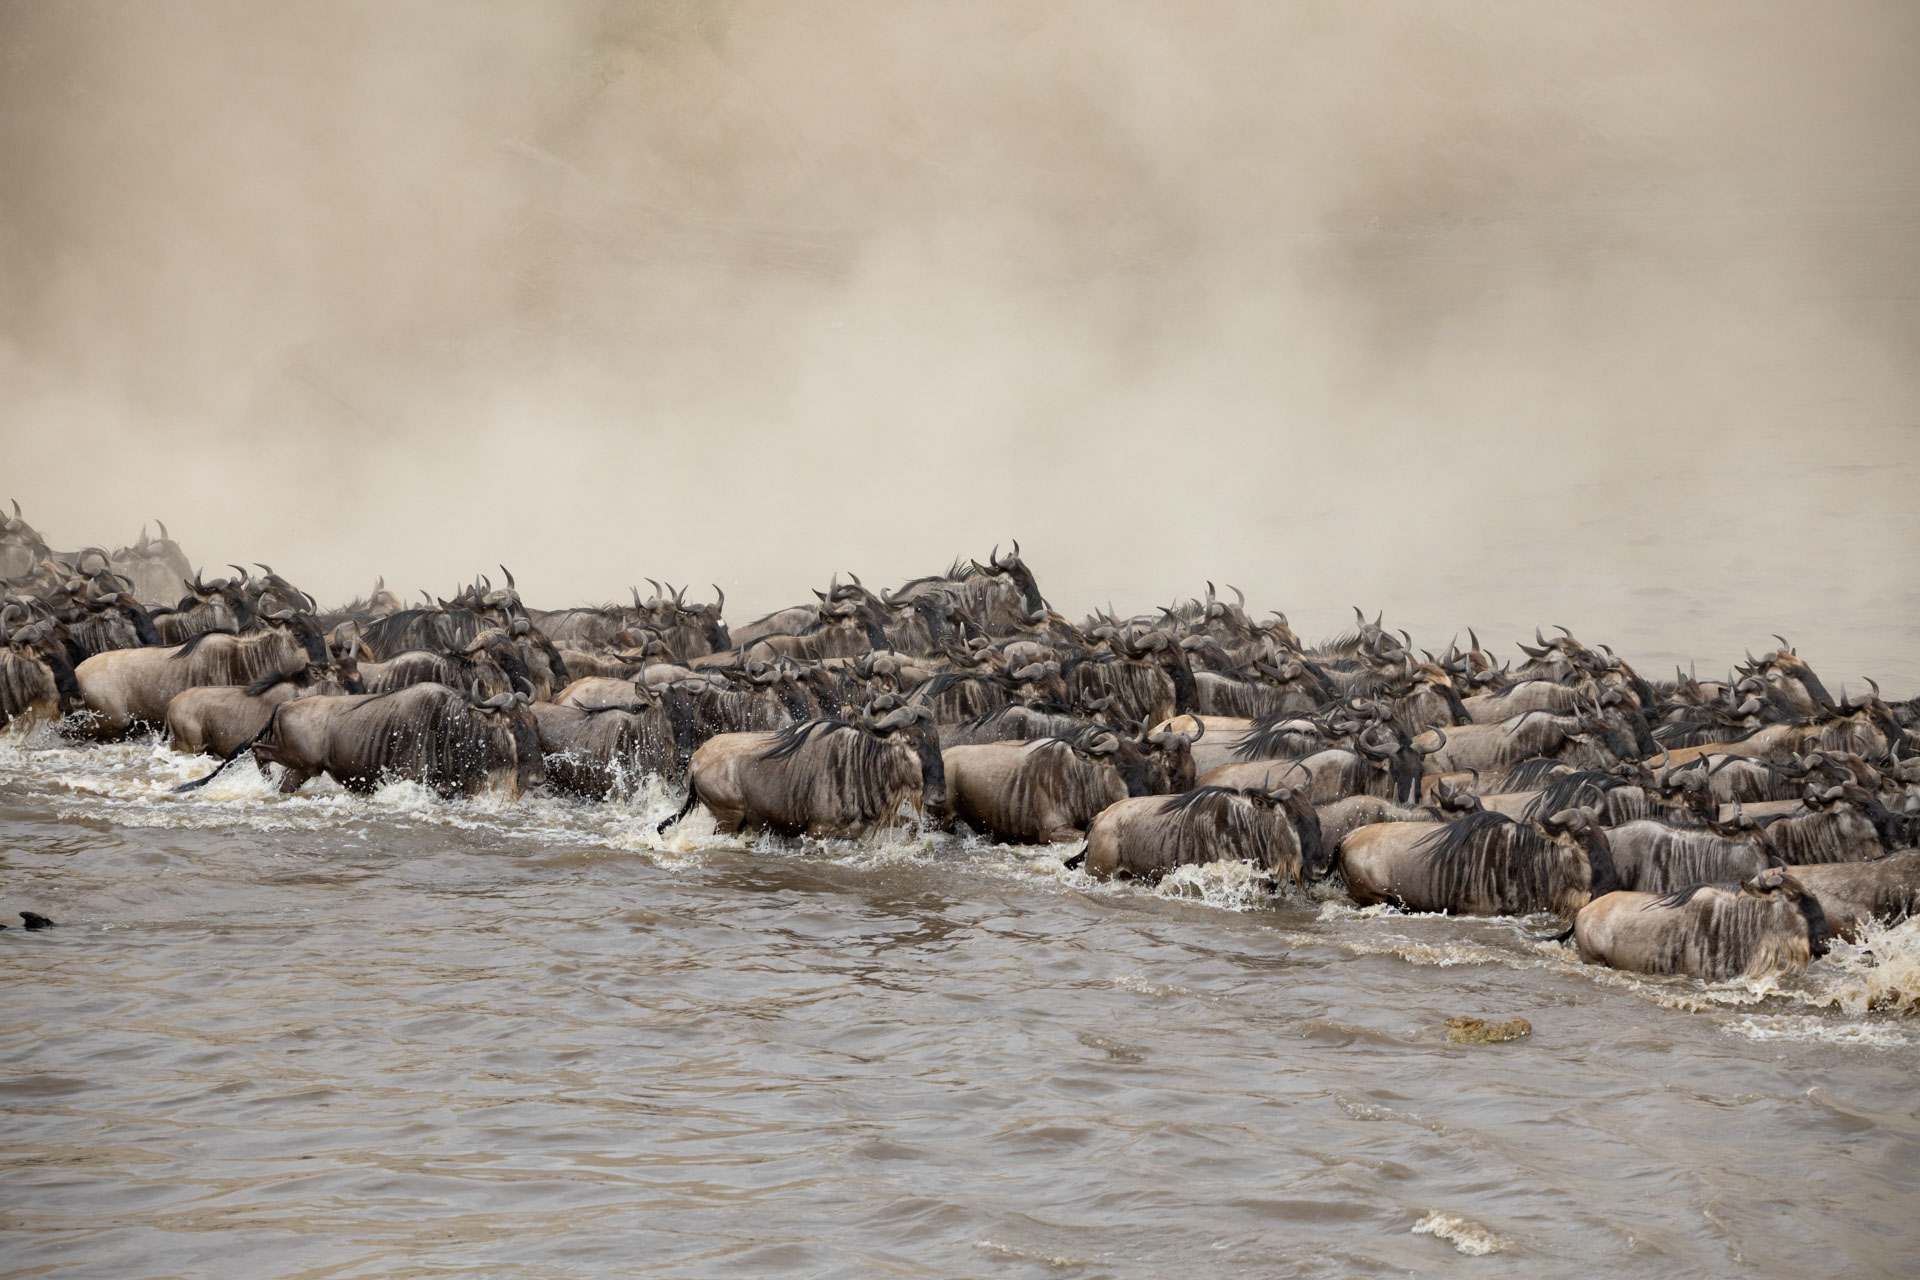 Above: A river crossing is the ultimate Great Migration viewing experience 